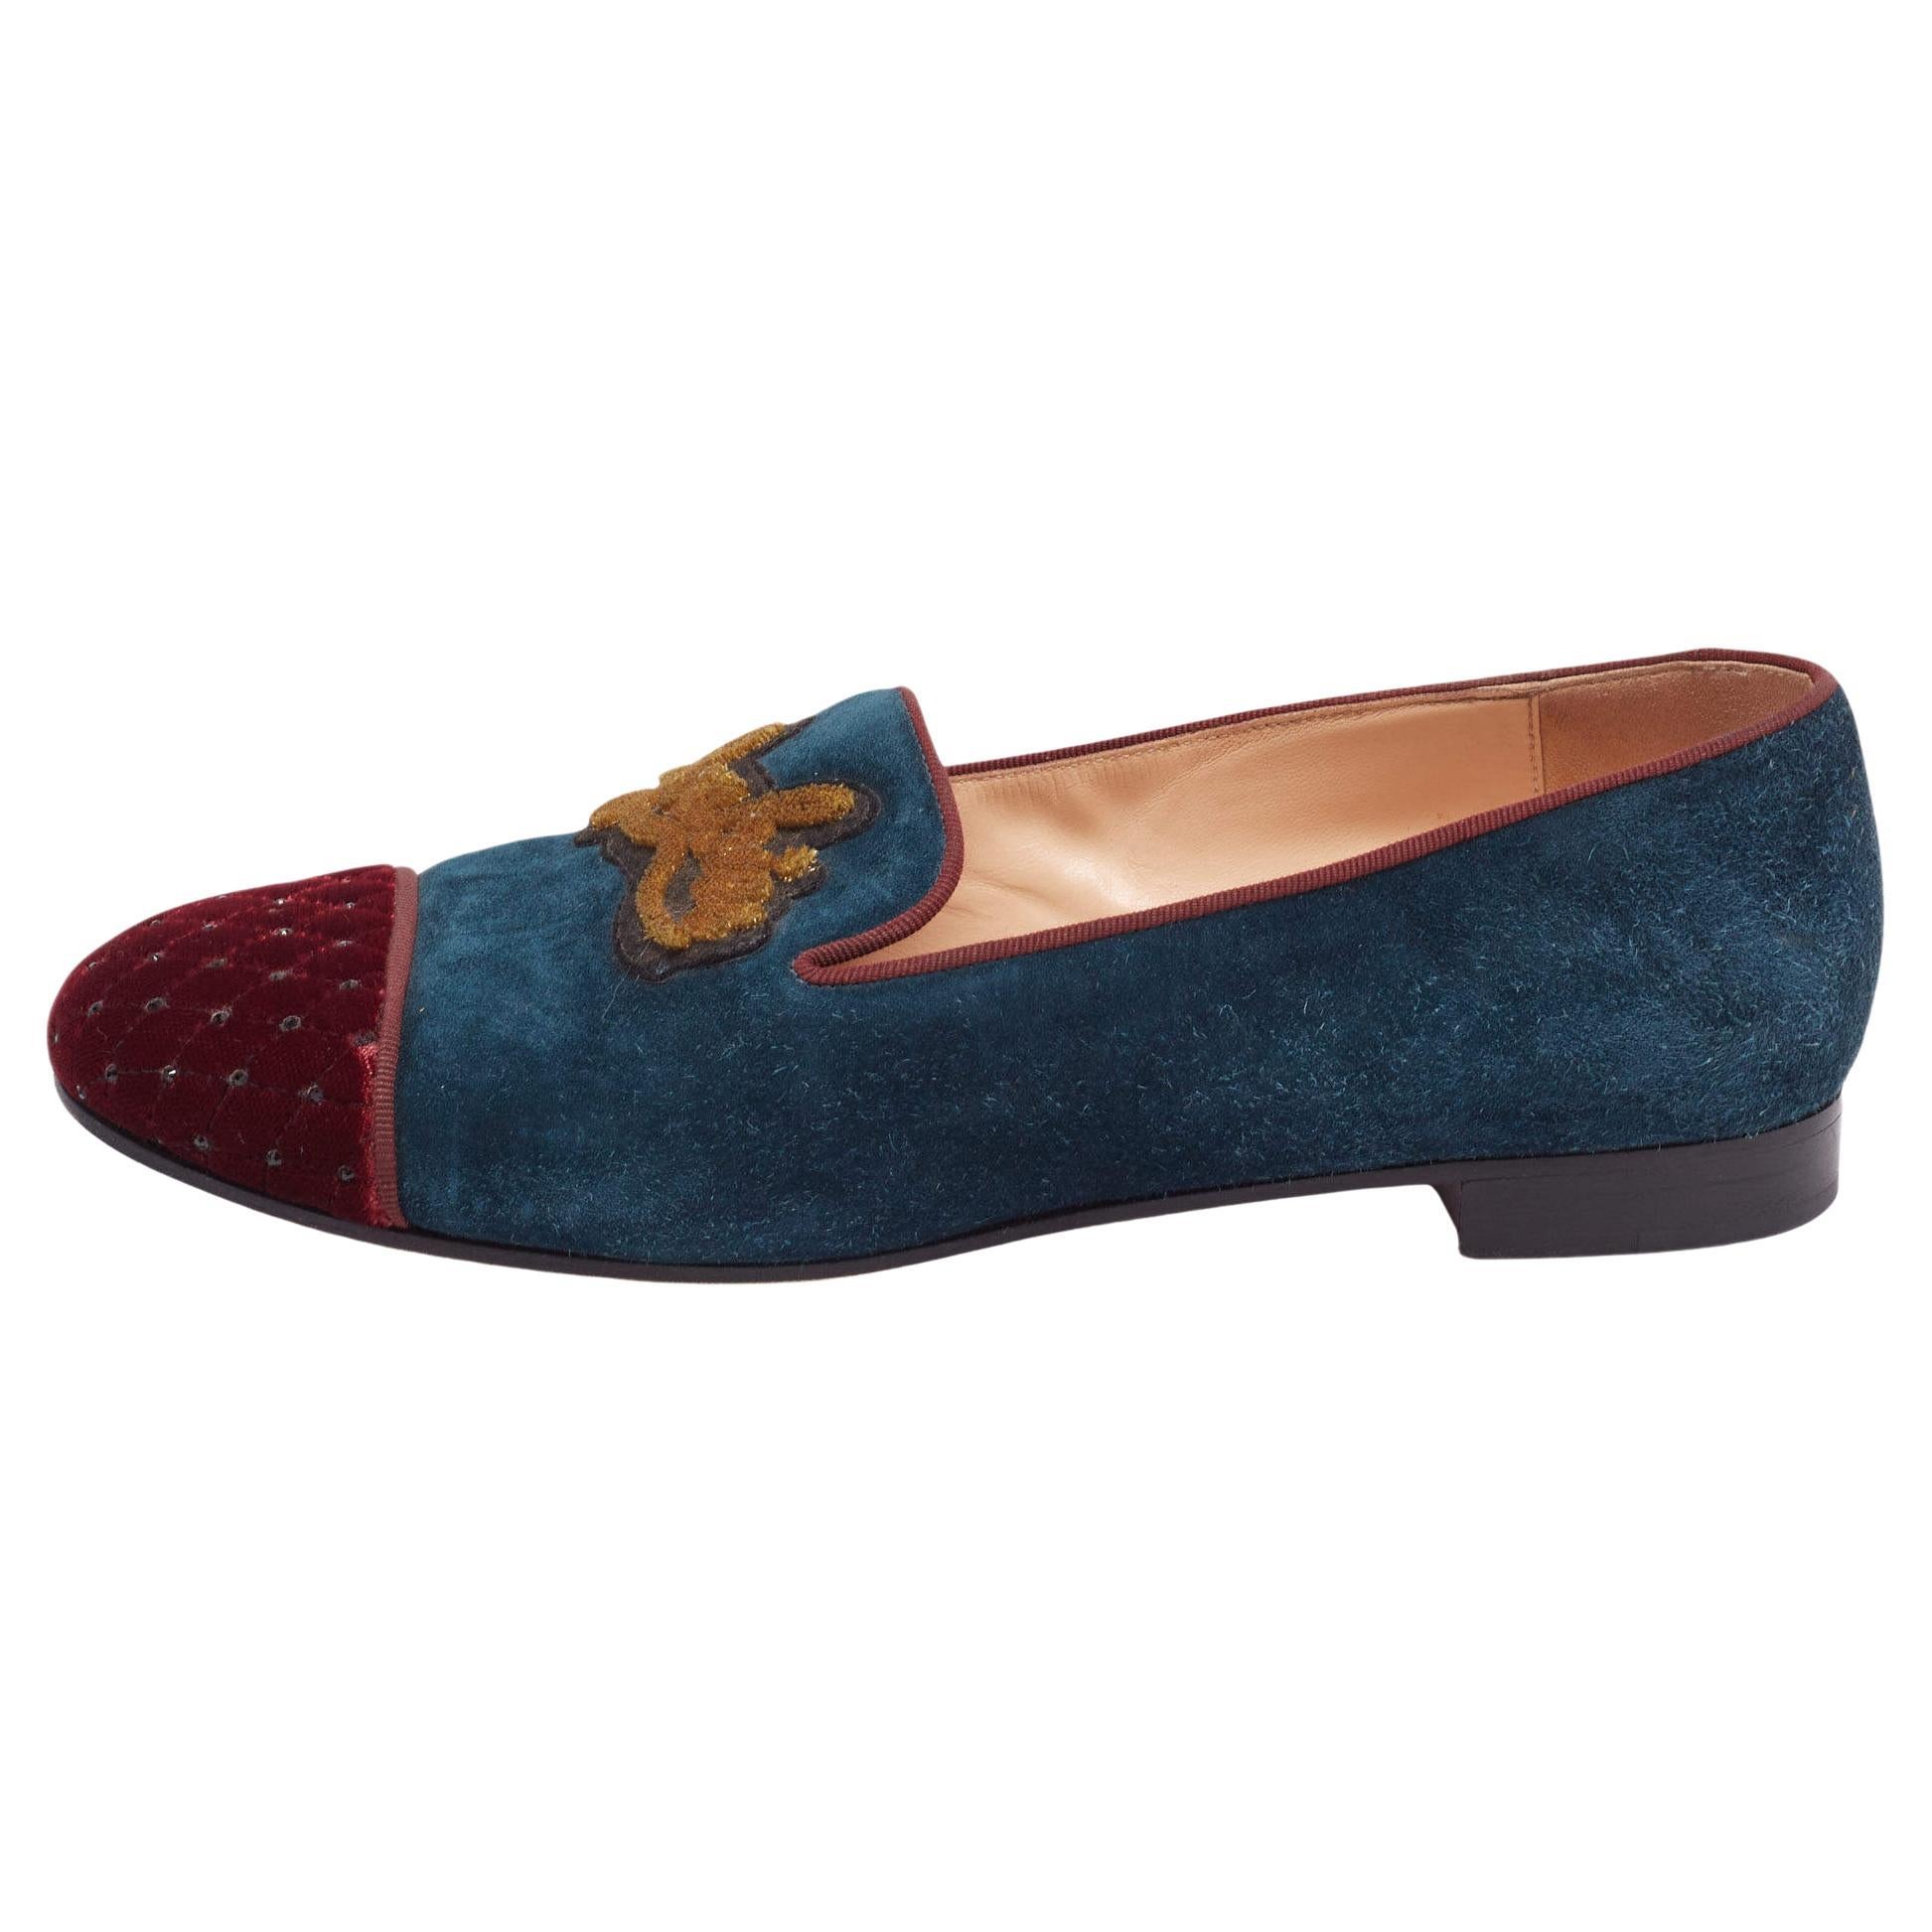 Christian Louboutin Tricolor Suede Velvet I Love My Loubies Loafers Size 38.5 For Sale